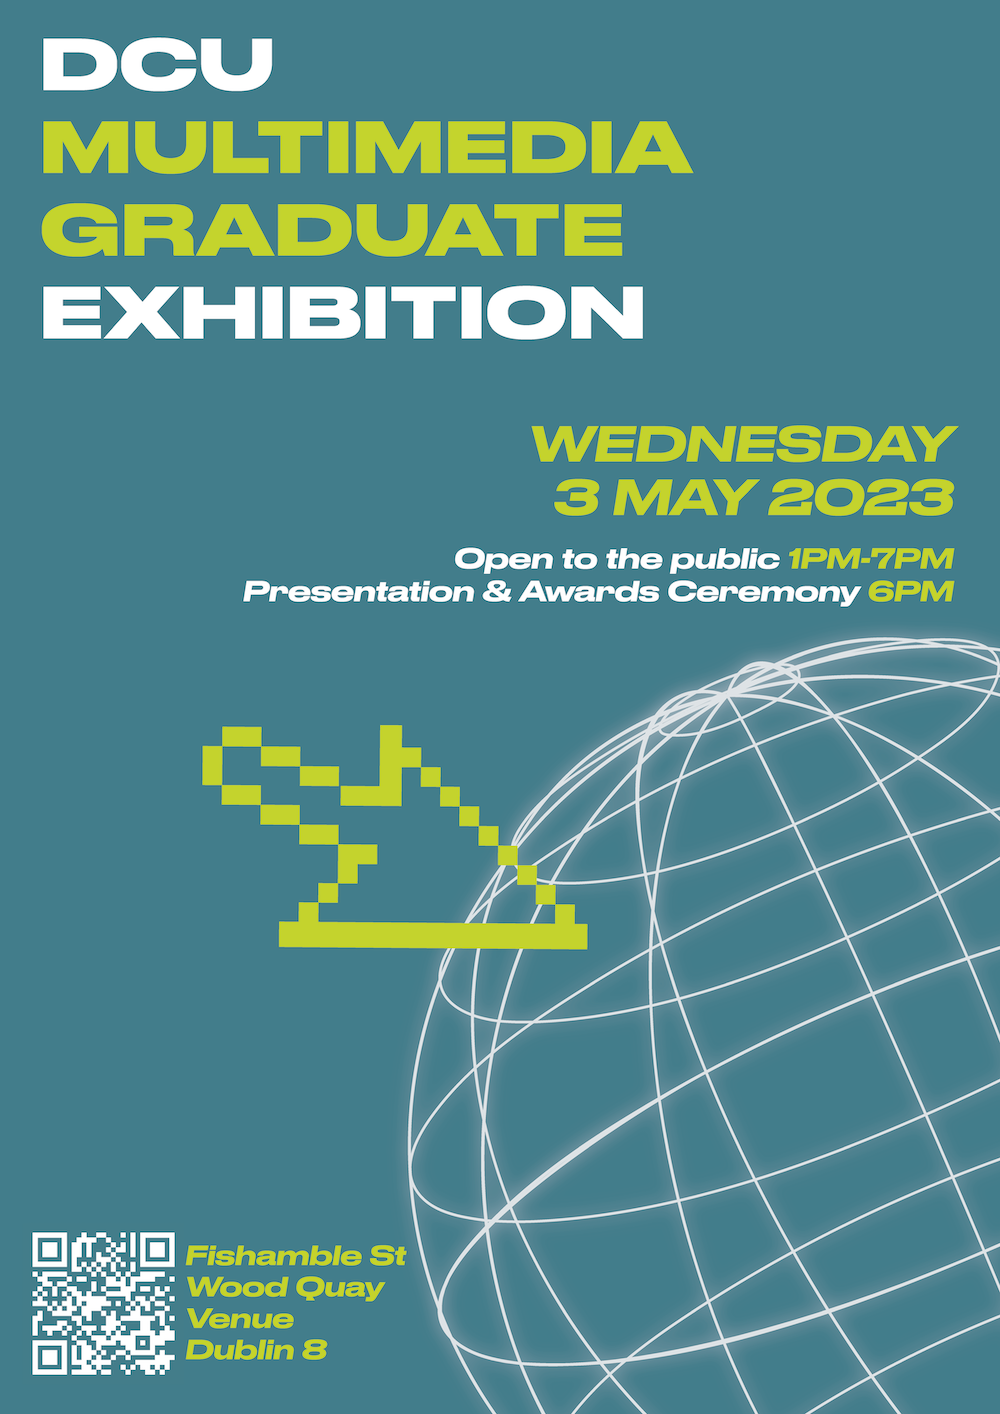 DCU Multimedia Graduate Exhibition. Wednesday 3 May 2023. Open to the public 1pm-7pm. Presentation and Awards ceremony 6pm.